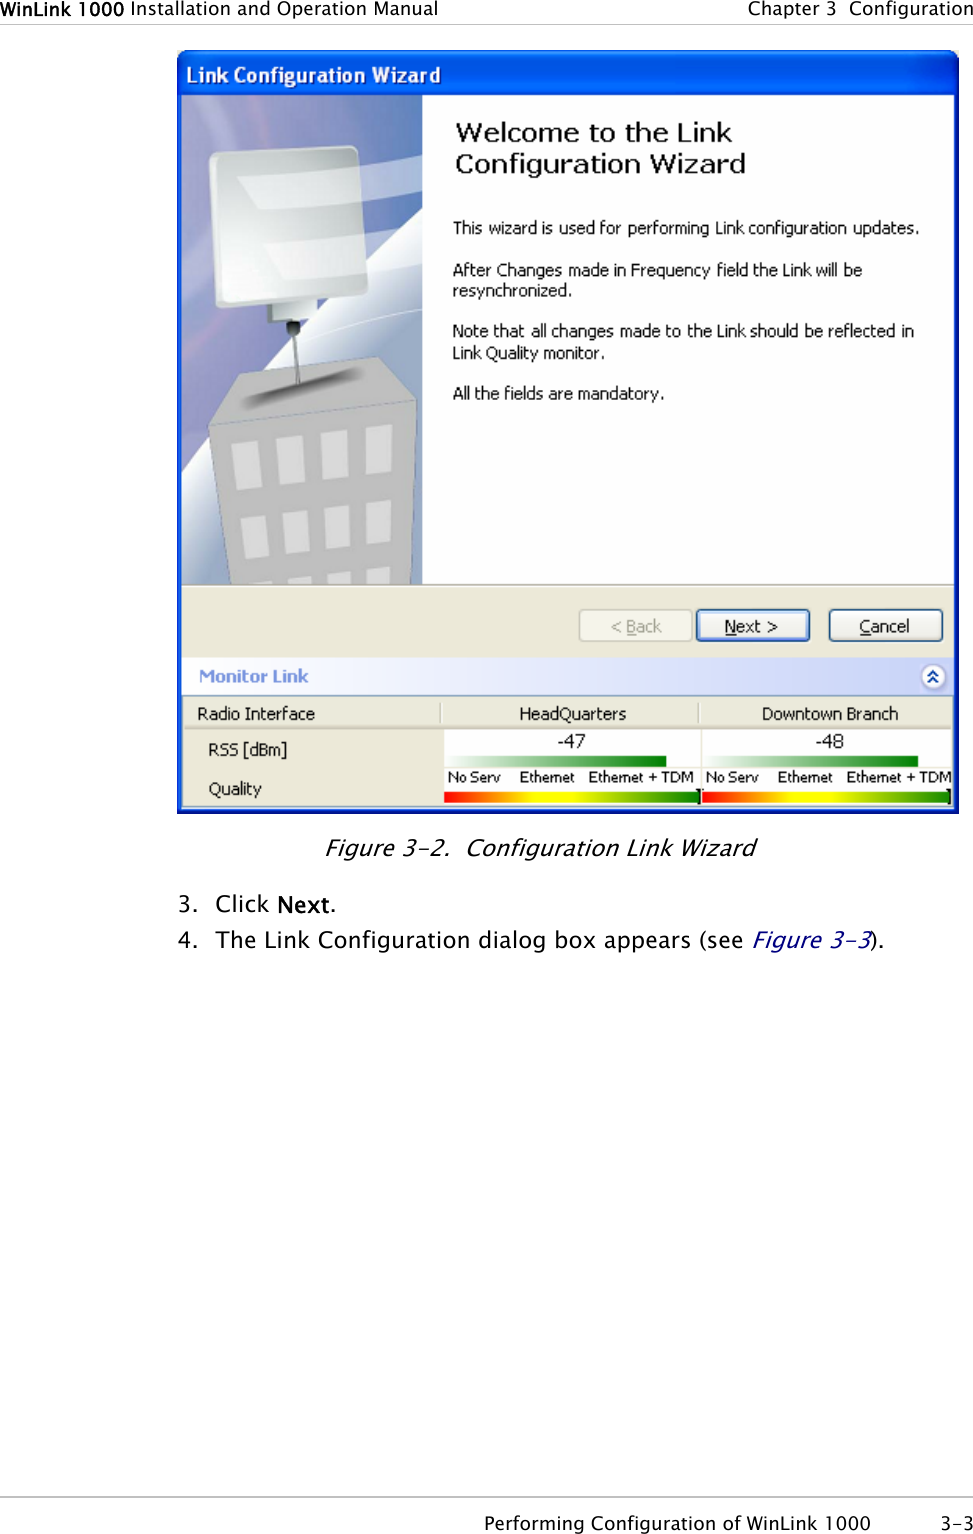 WinLink 1000 Installation and Operation Manual  Chapter 3  Configuration  Figure 3-2.  Configuration Link Wizard 3. Click Next. 4. The Link Configuration dialog box appears (see Figure 3-3).   Performing Configuration of WinLink 1000  3-3 